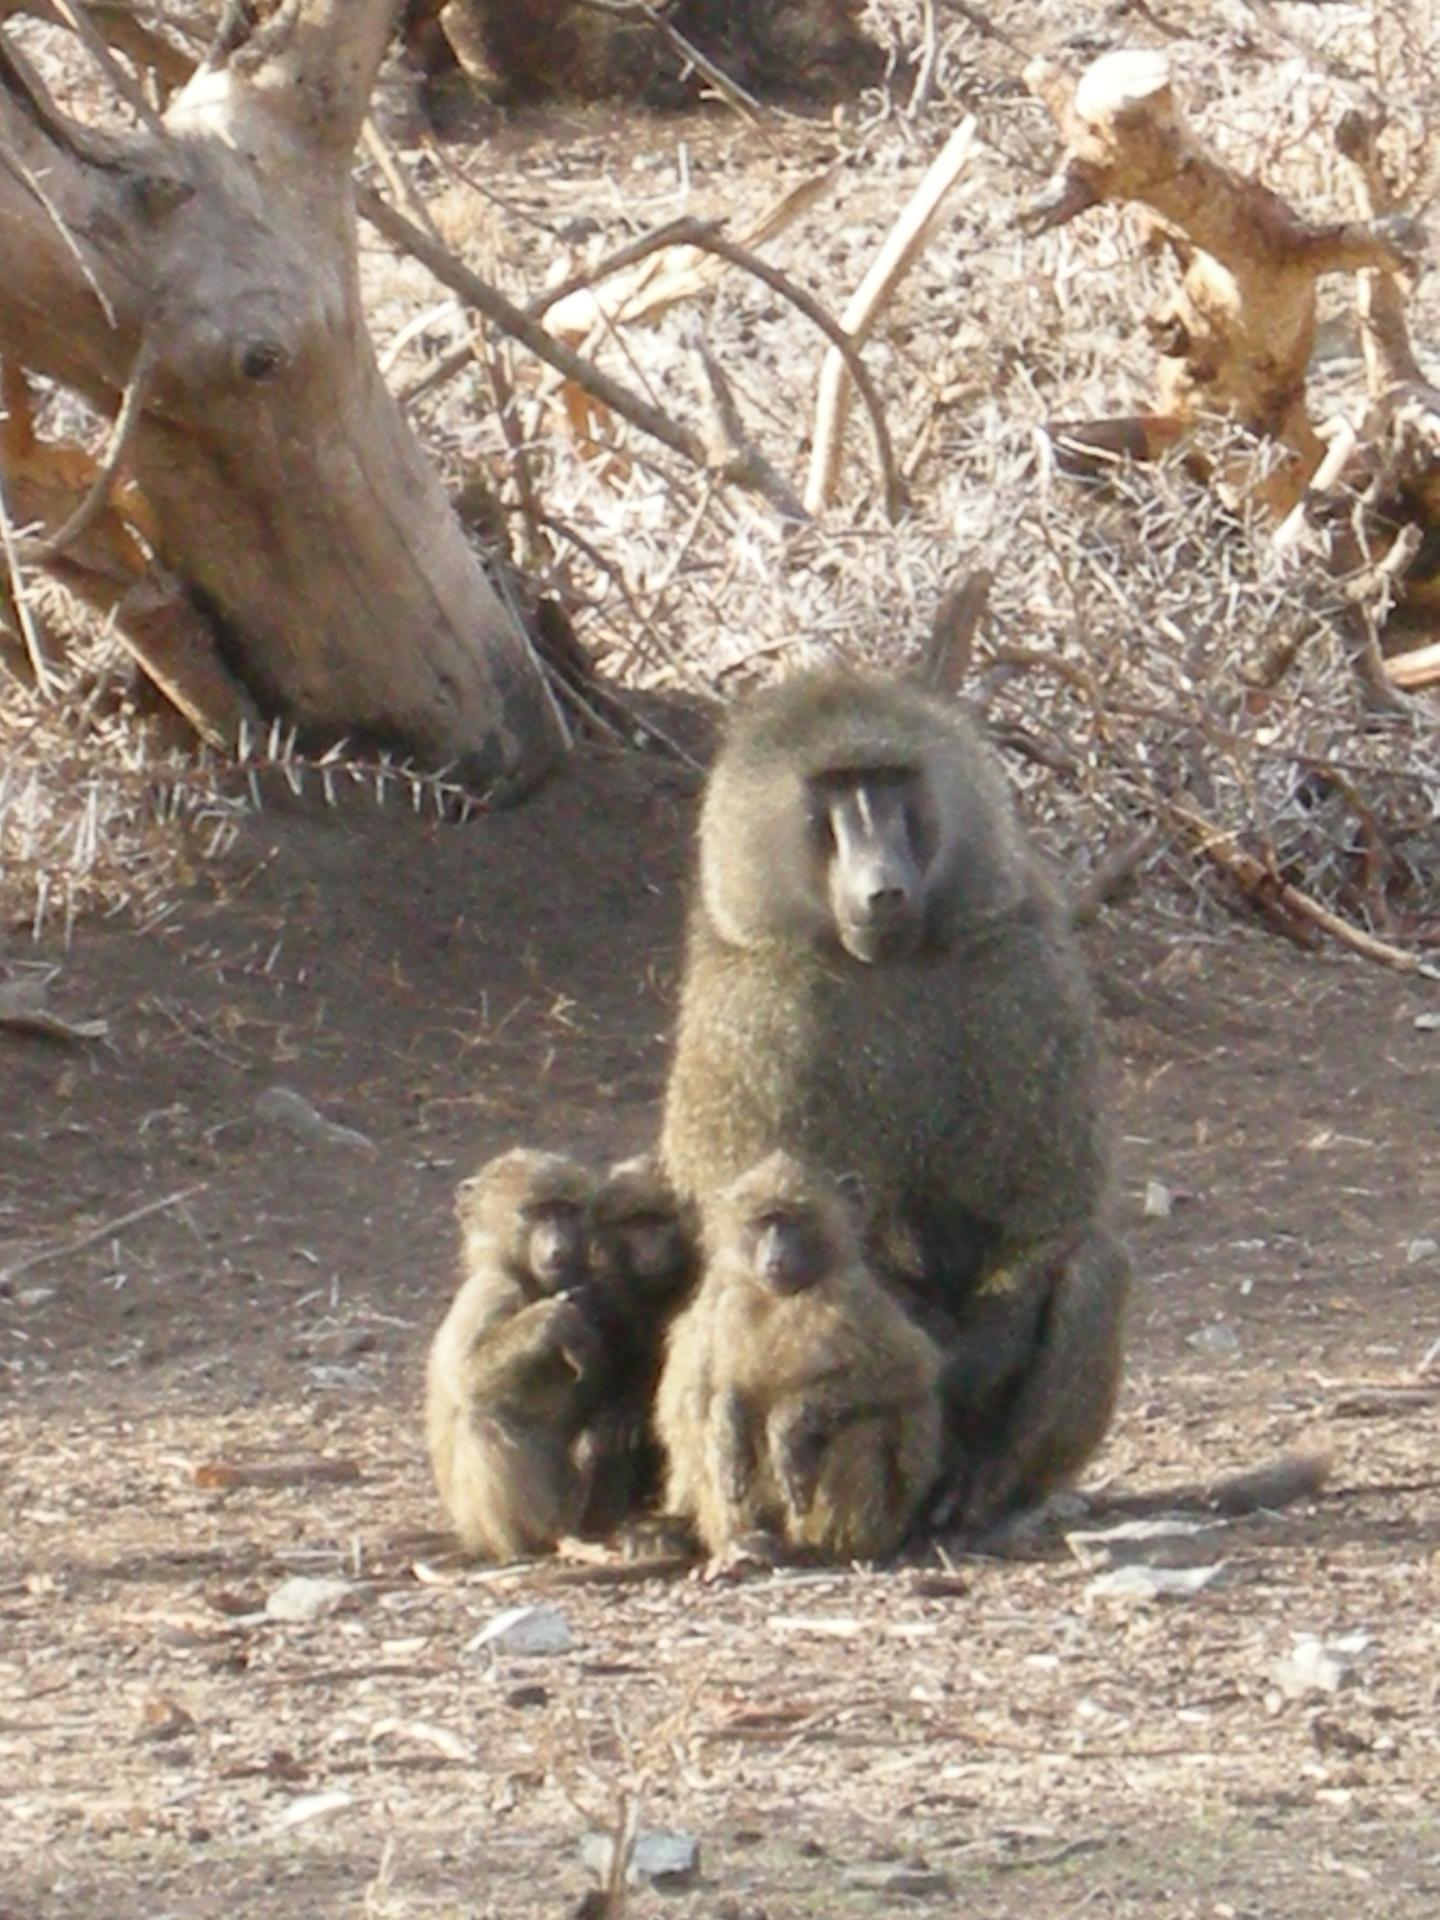 Adult Male Olive Baboon Resting with Young Offspring.